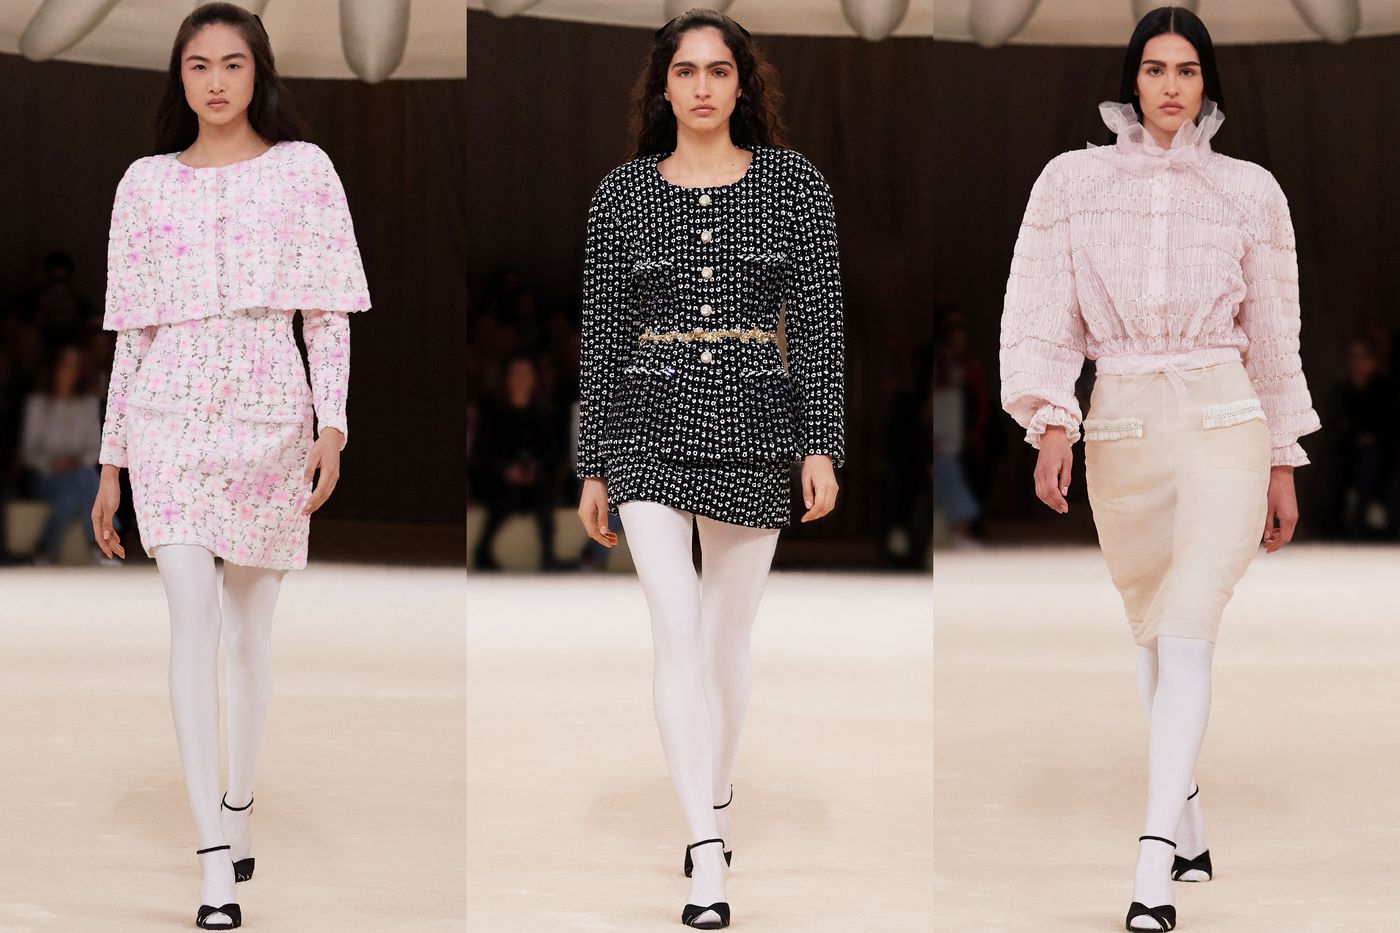 At Chanel, a Couture Show That Plays It Safe